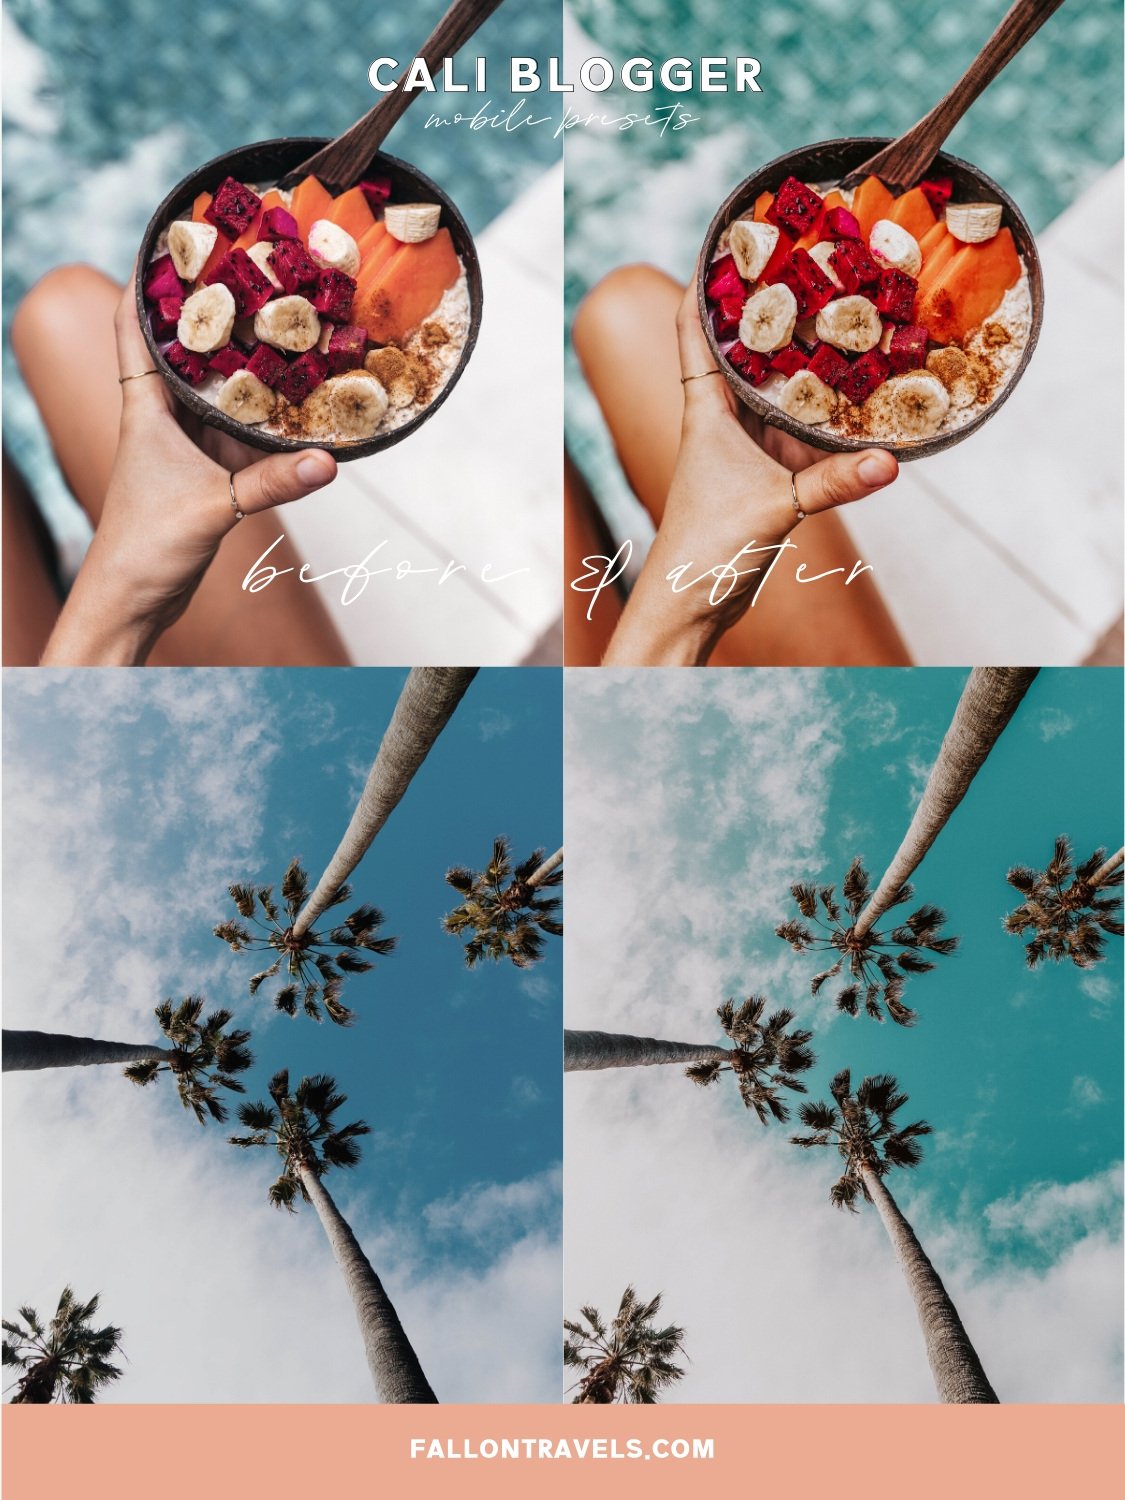 cali blogger lightroom mobile presets dng fallontravels photo editing iphone 120